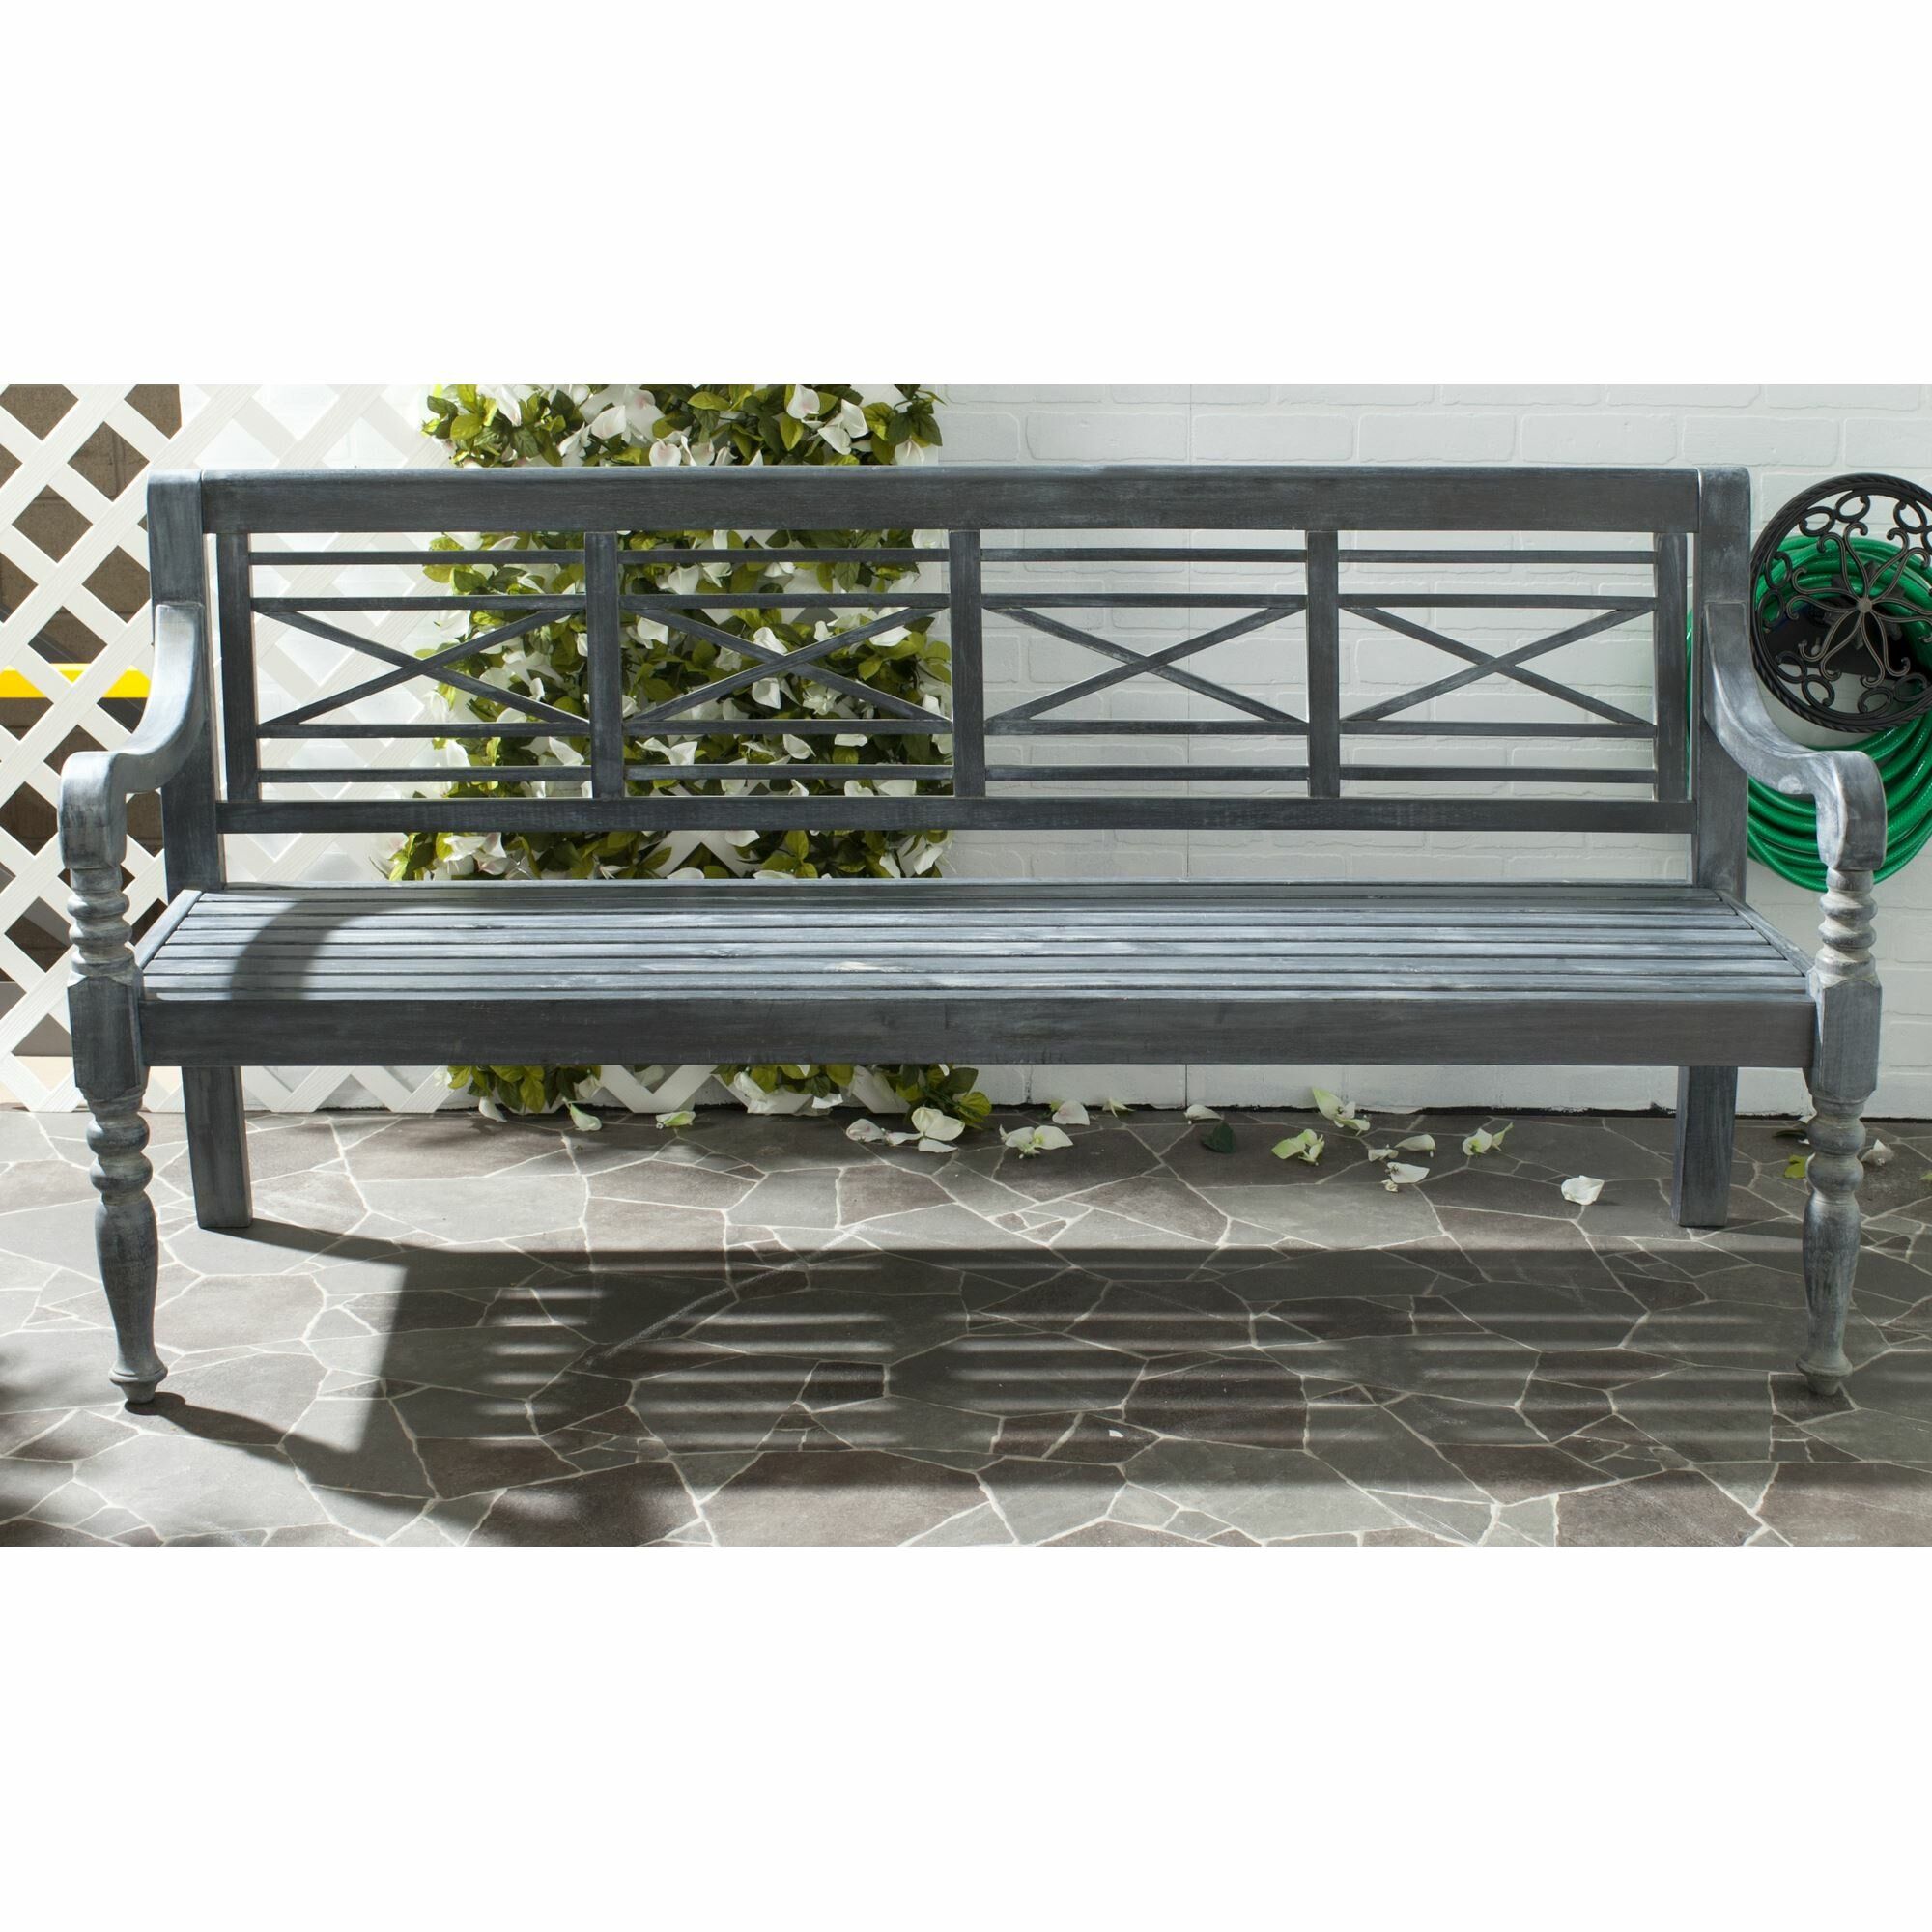 Putnam Wooden Garden Bench Intended For Shelbie Wooden Garden Benches (View 18 of 25)